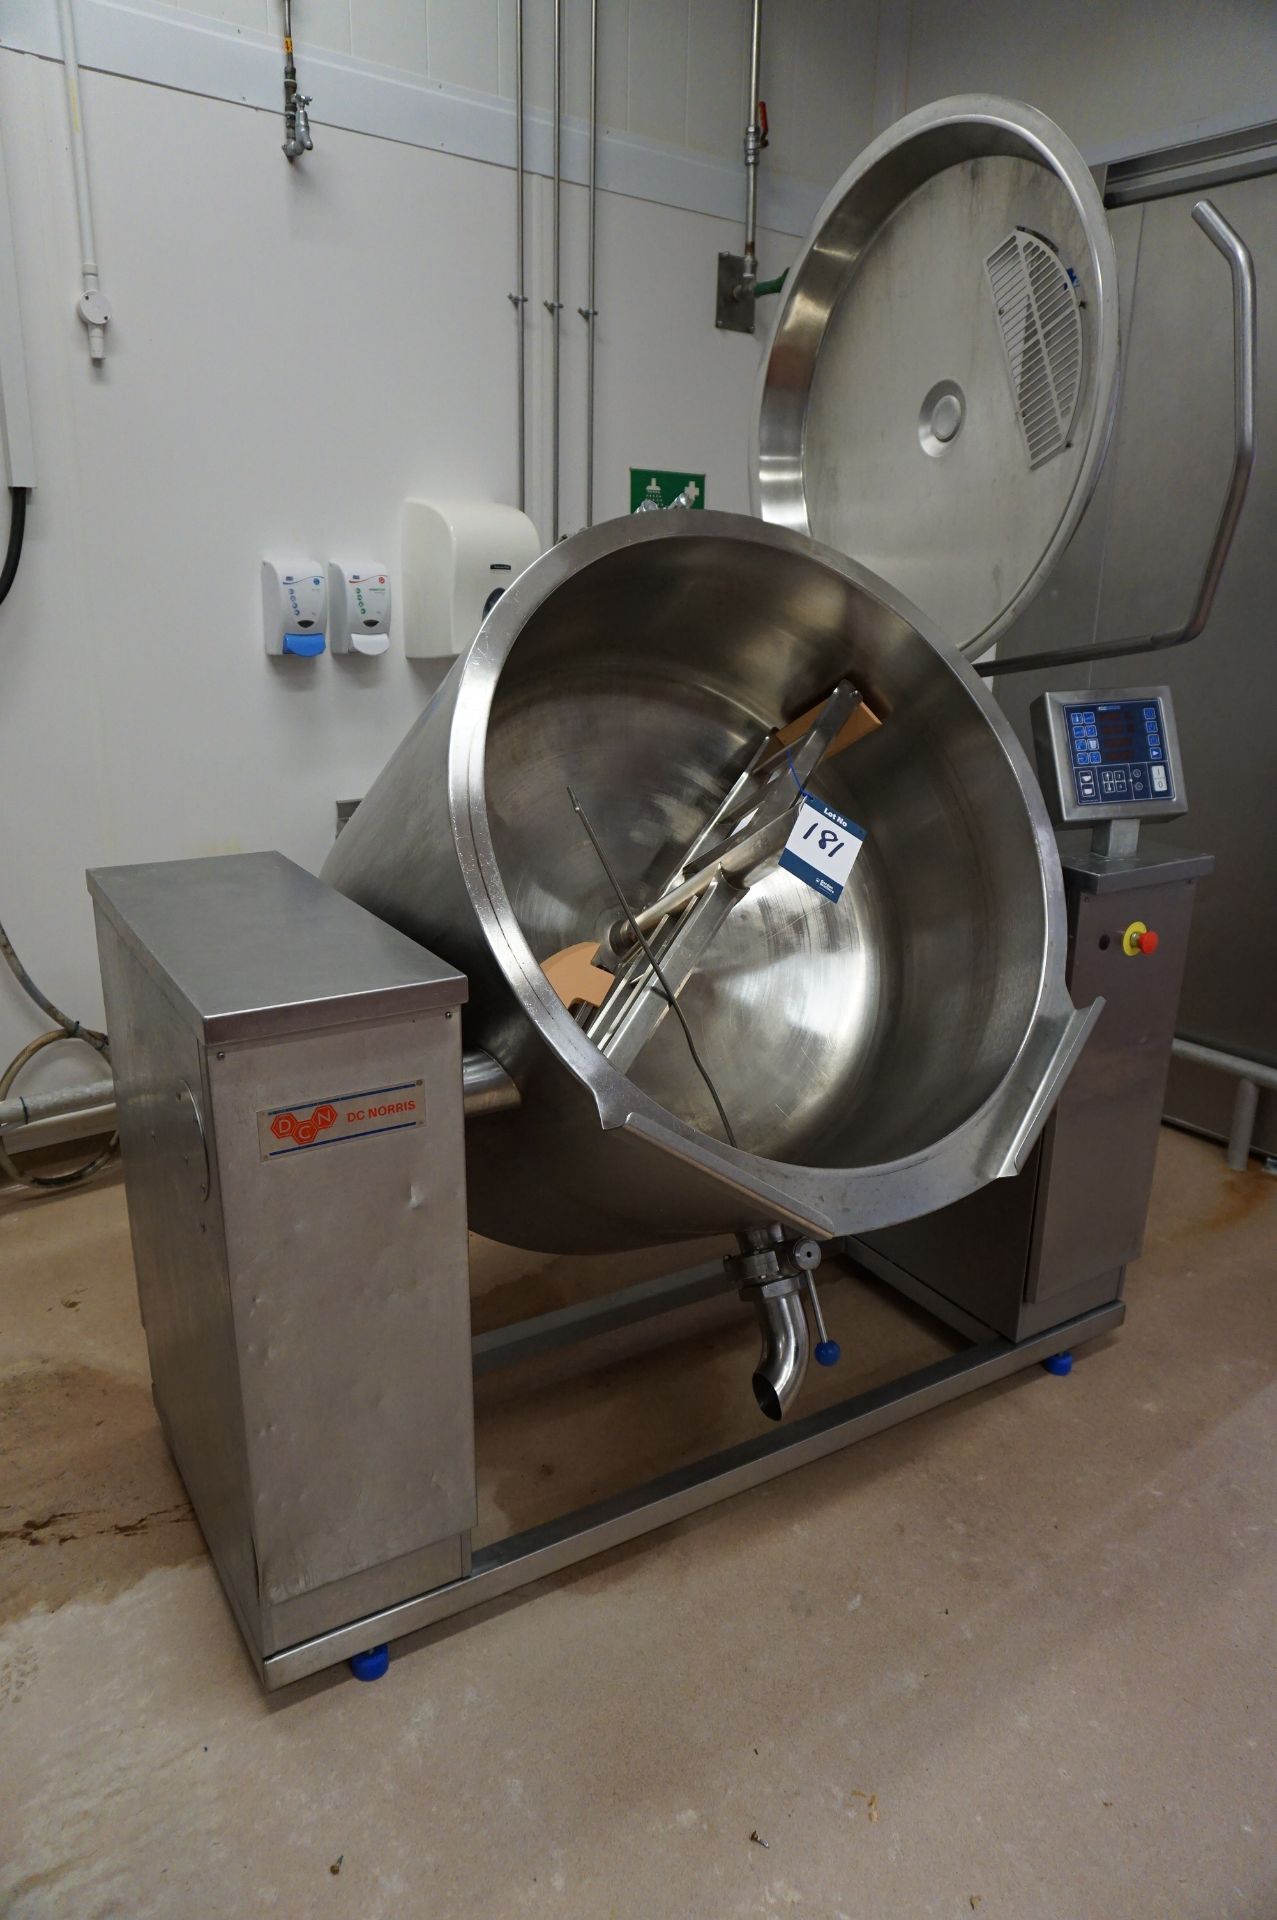 DC Norris, Model: MM300, 300kg cooking vat, Serial No. N2723 (2012) with tilting function and Joni